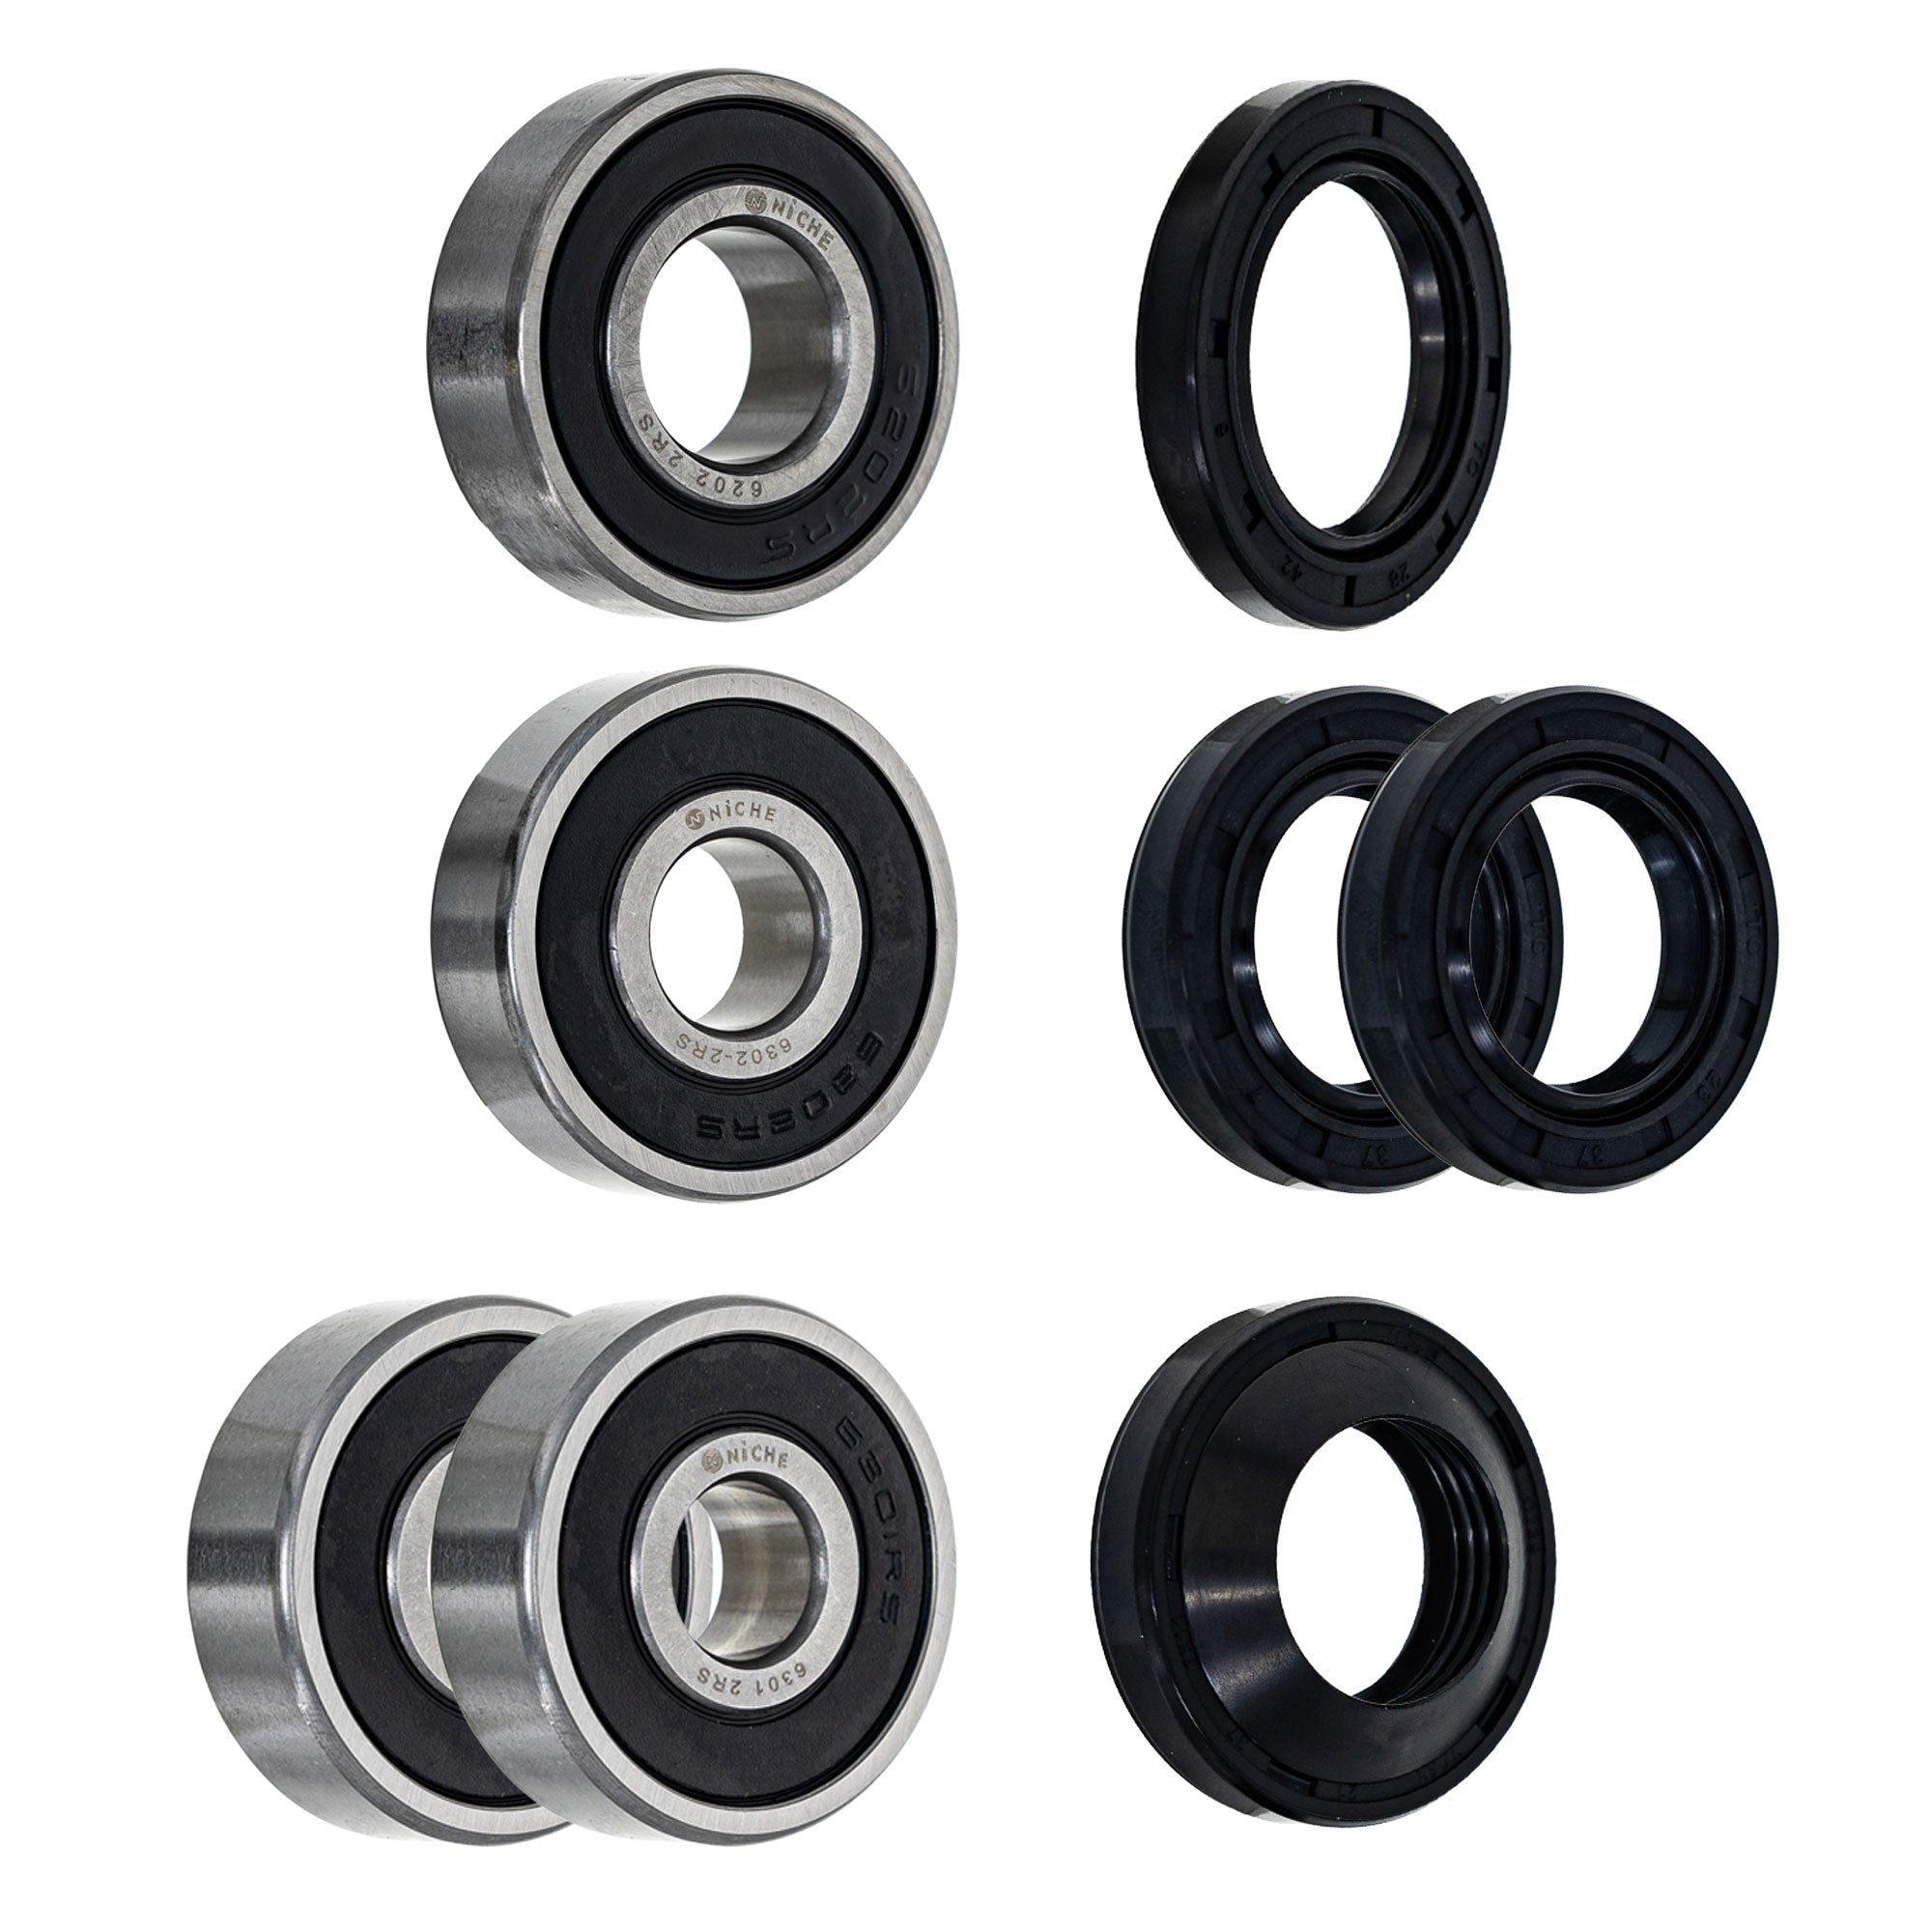 Wheel Bearing Seal Kit for zOTHER Ref No NICHE MK1008473